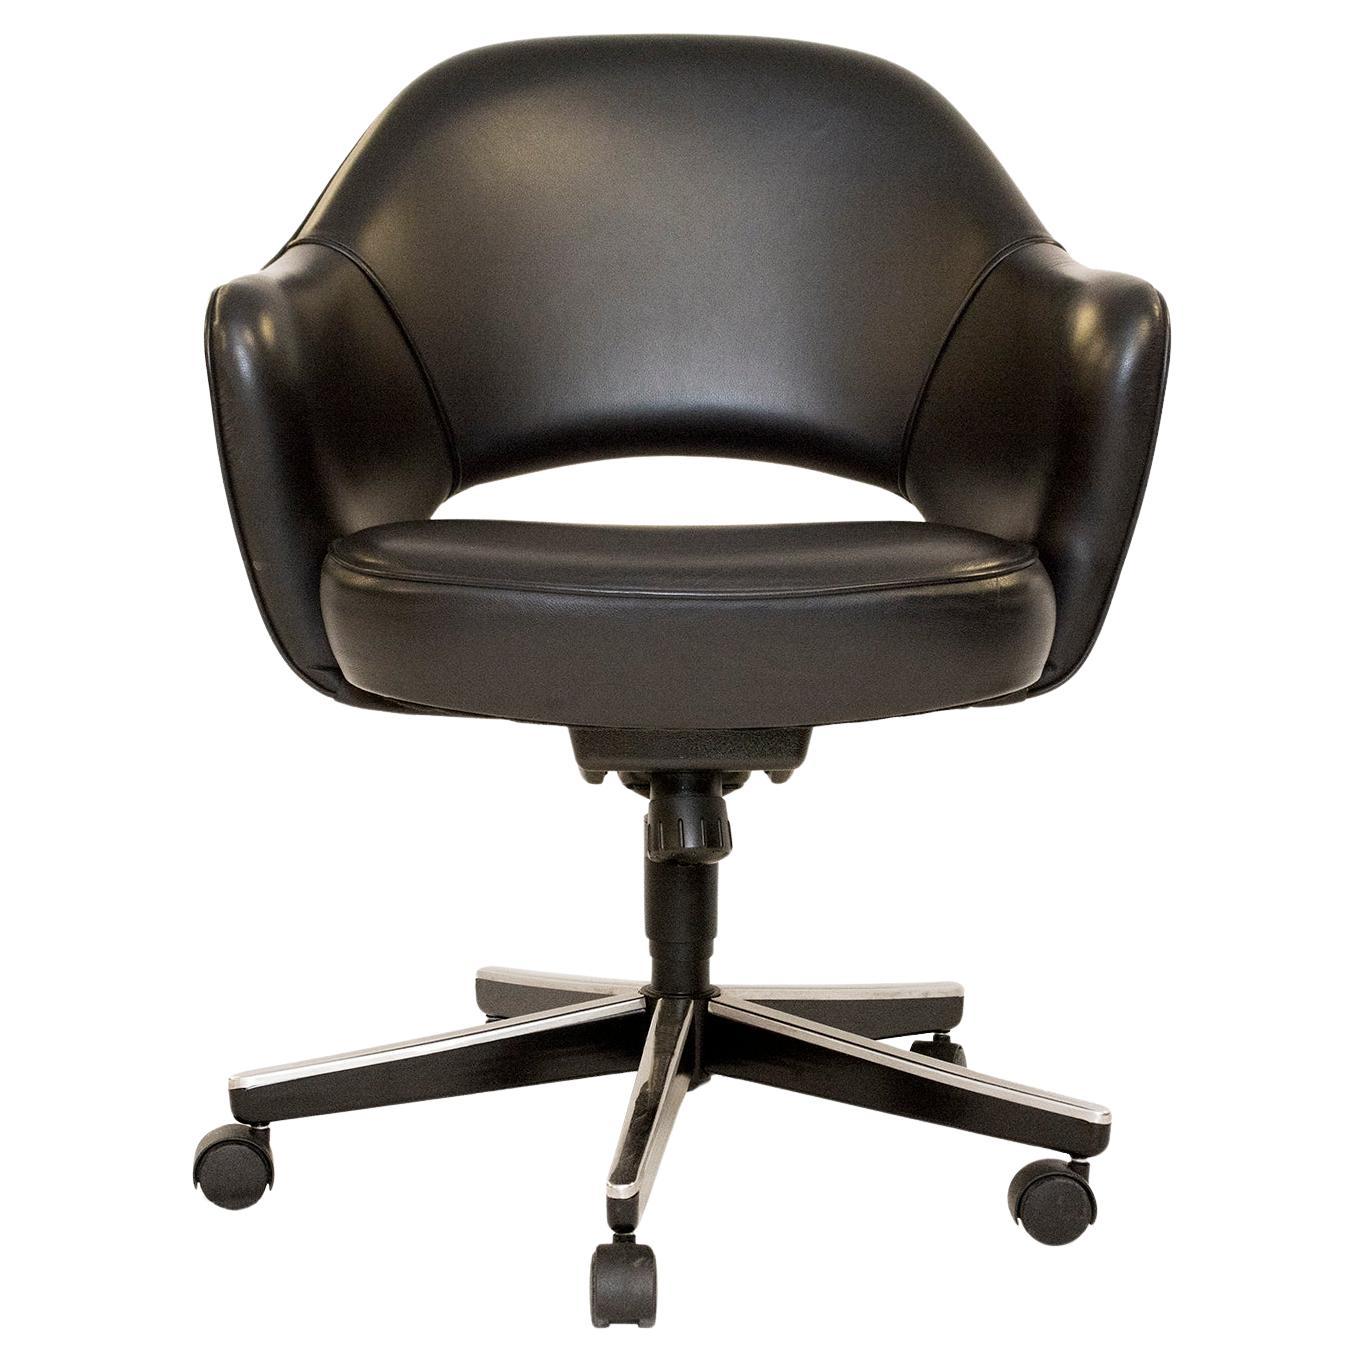 Saarinen Executive Arm Chair in Original Black Leather, Contemporary Swivel Base For Sale